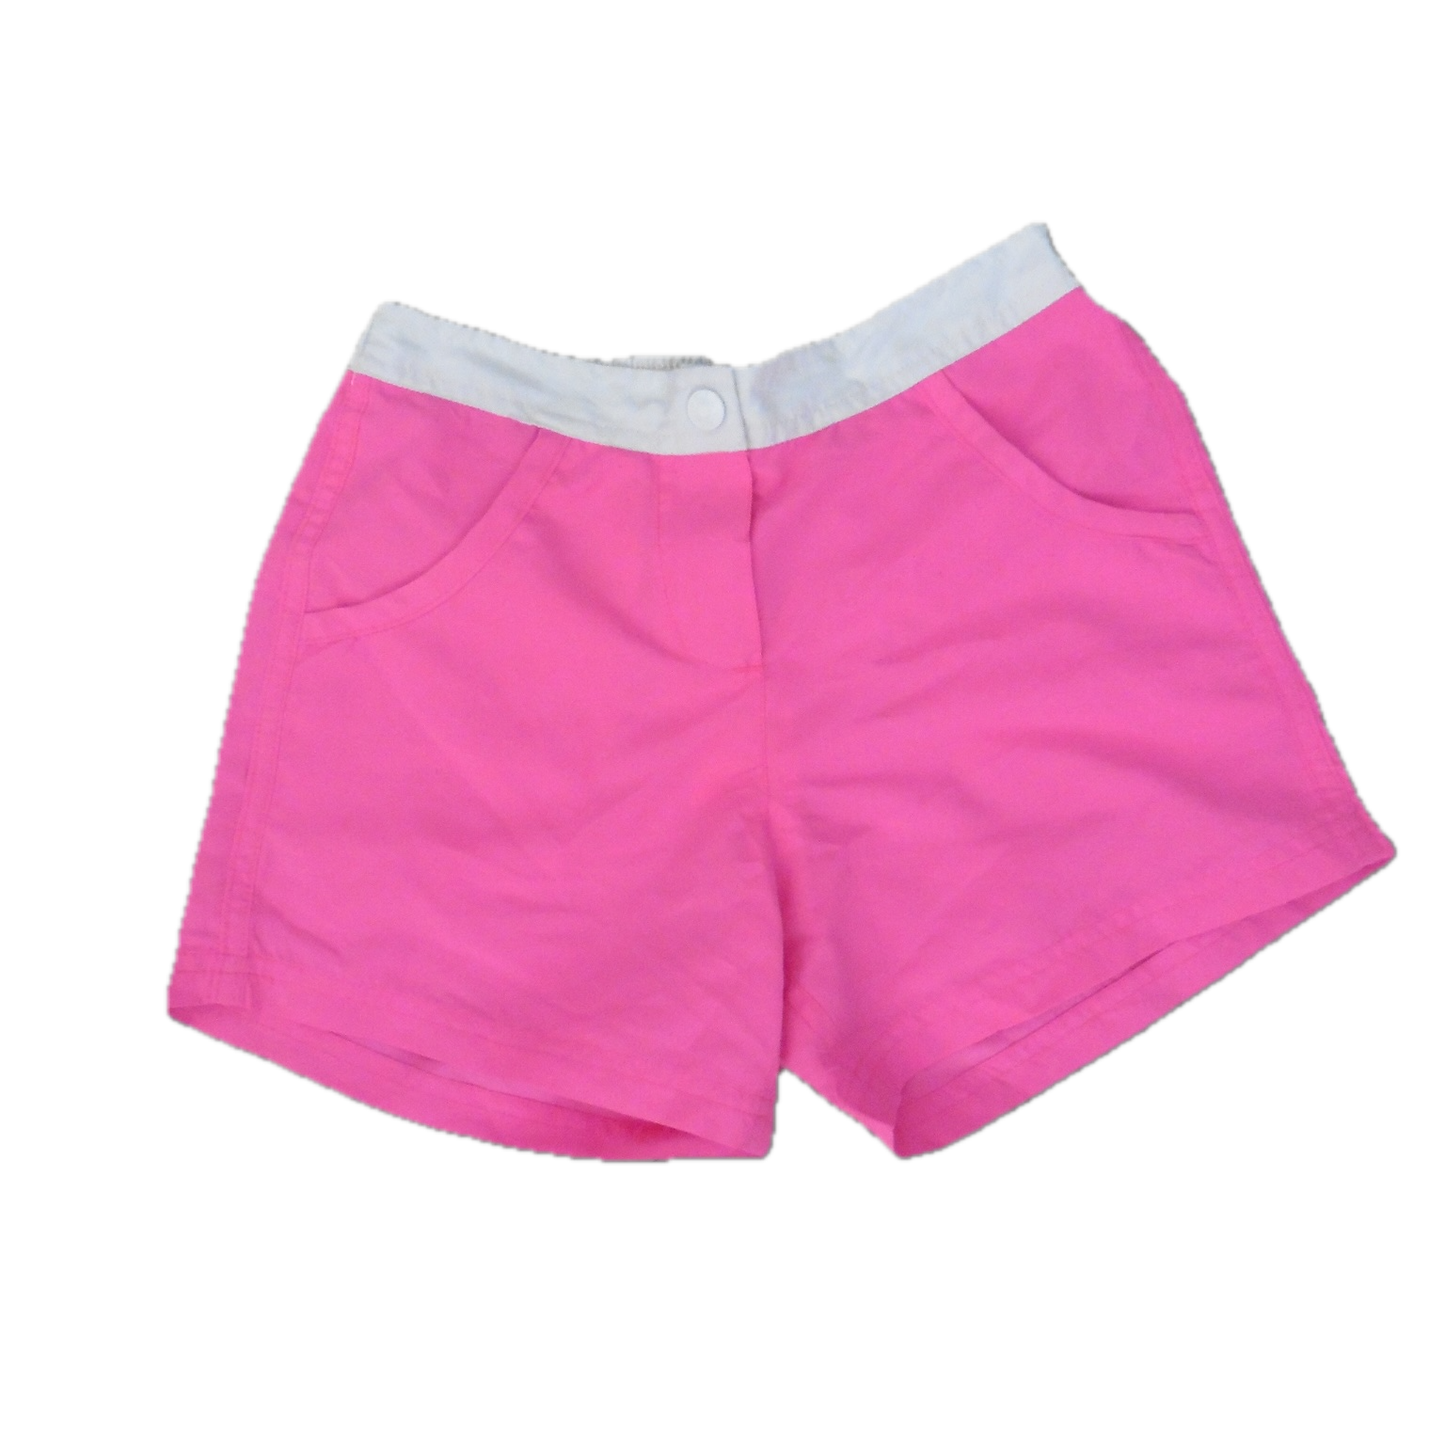 Boden pink swimshorts 11y NEW